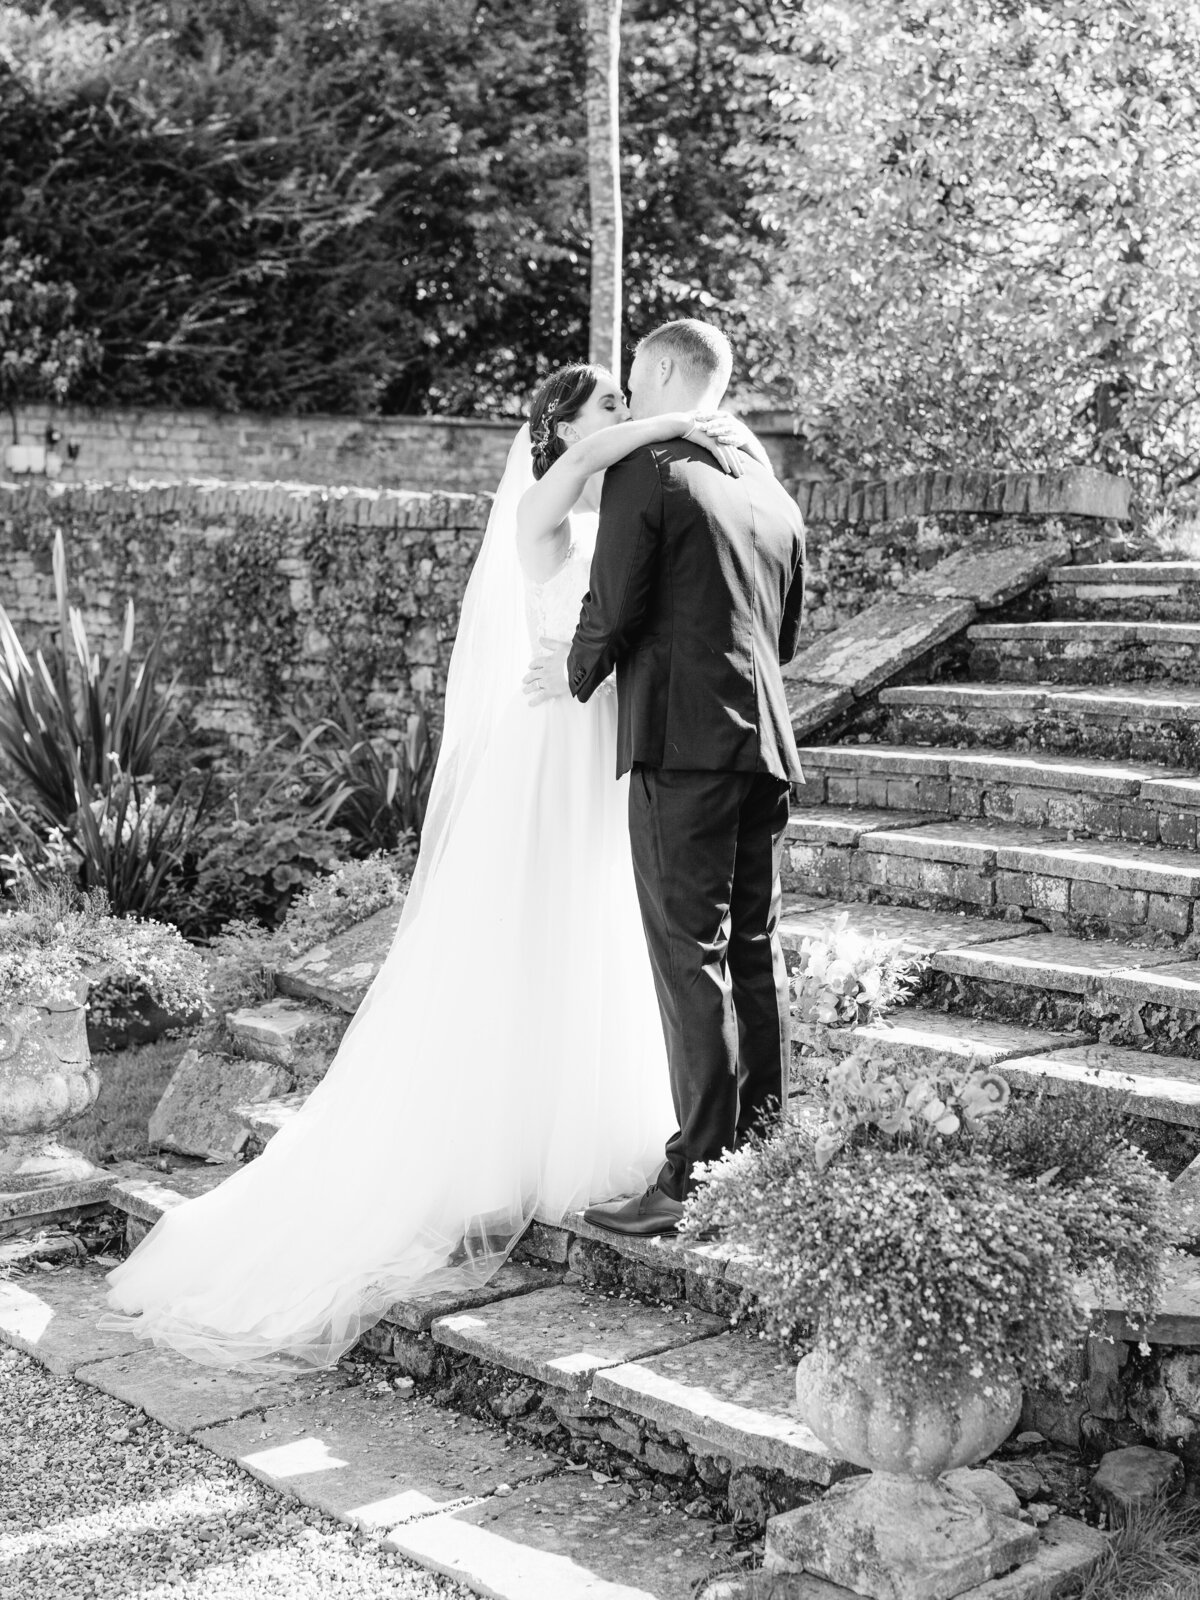 Bride and groom at country estate wedding in the Midlands